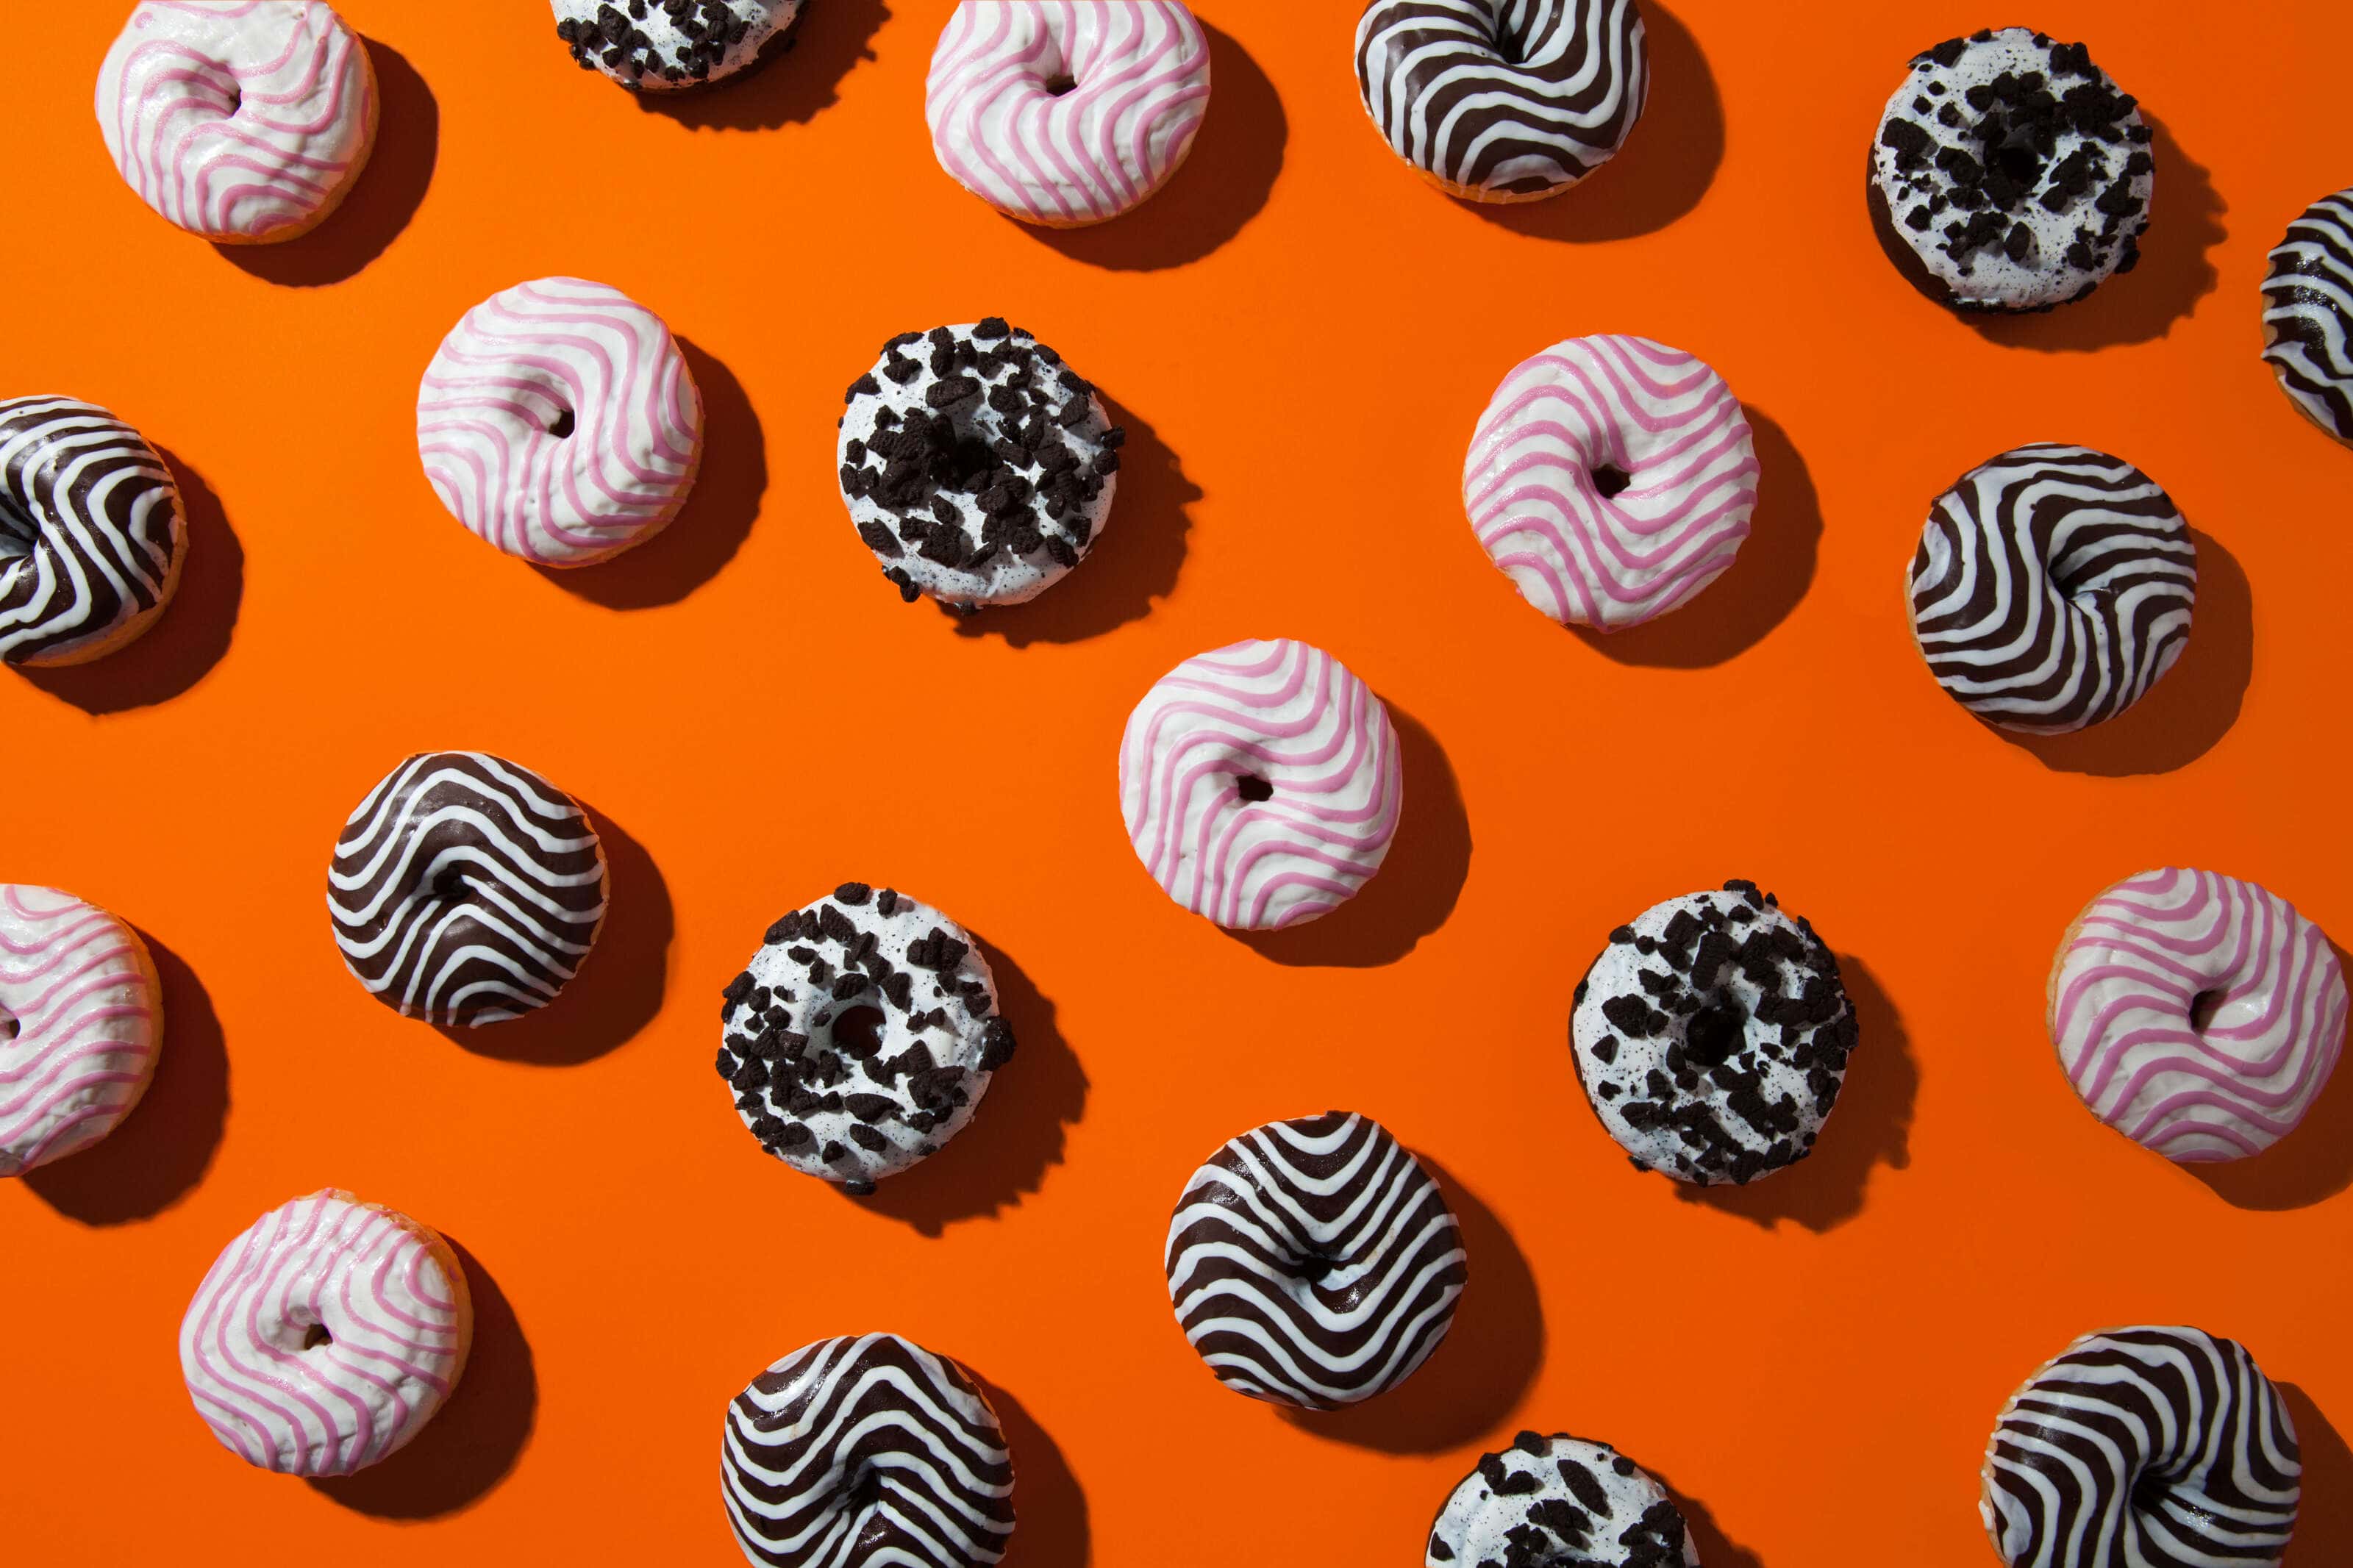 Doughnuts photographed on an orange background with hard shodows.